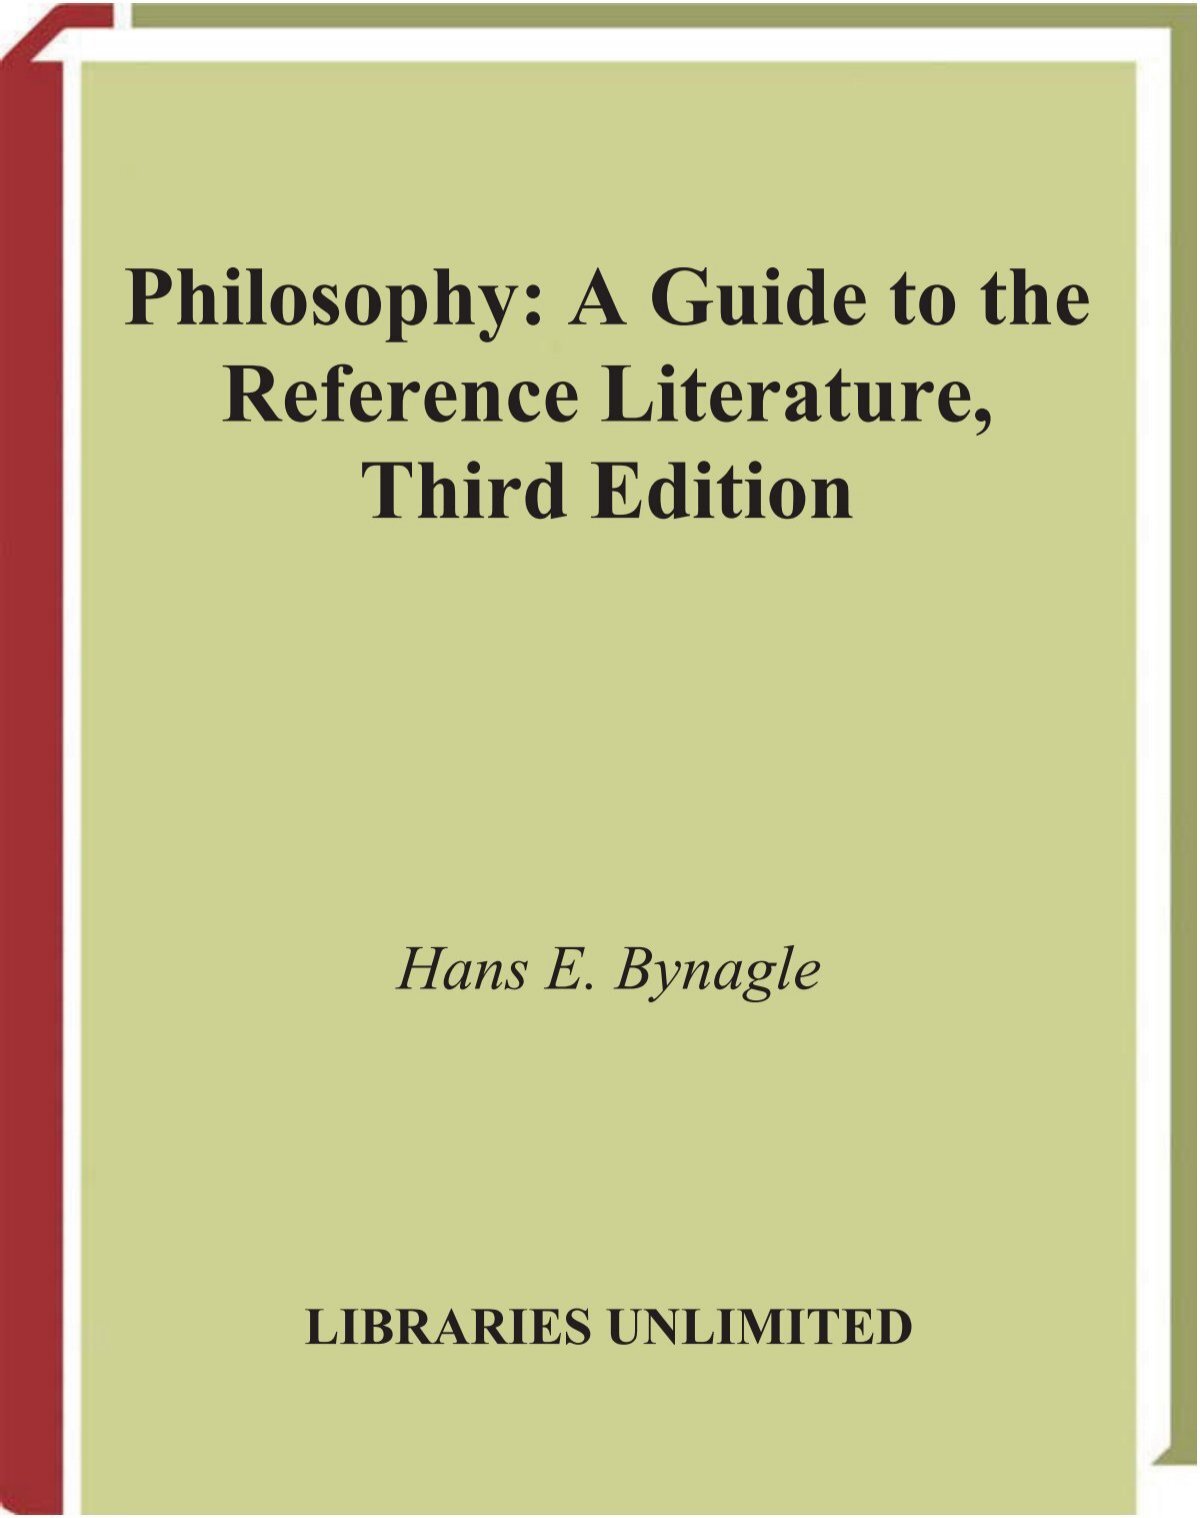 phd philosophy and literature